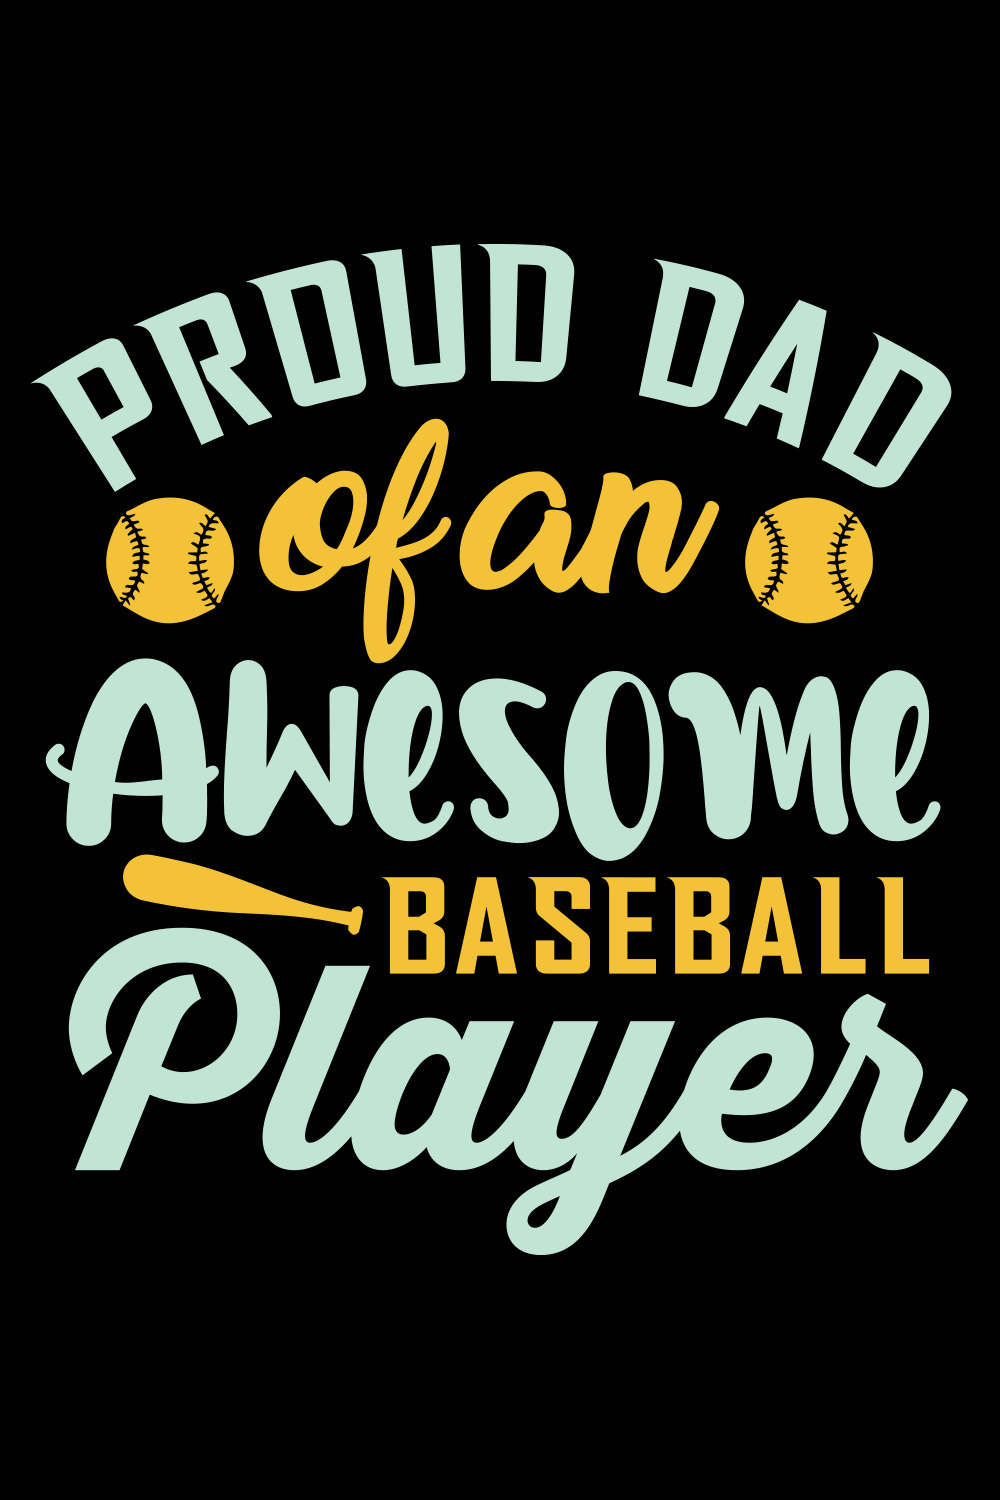 I'm a Proud Dad of an Awesome Baseball T-shirt pinterest image.